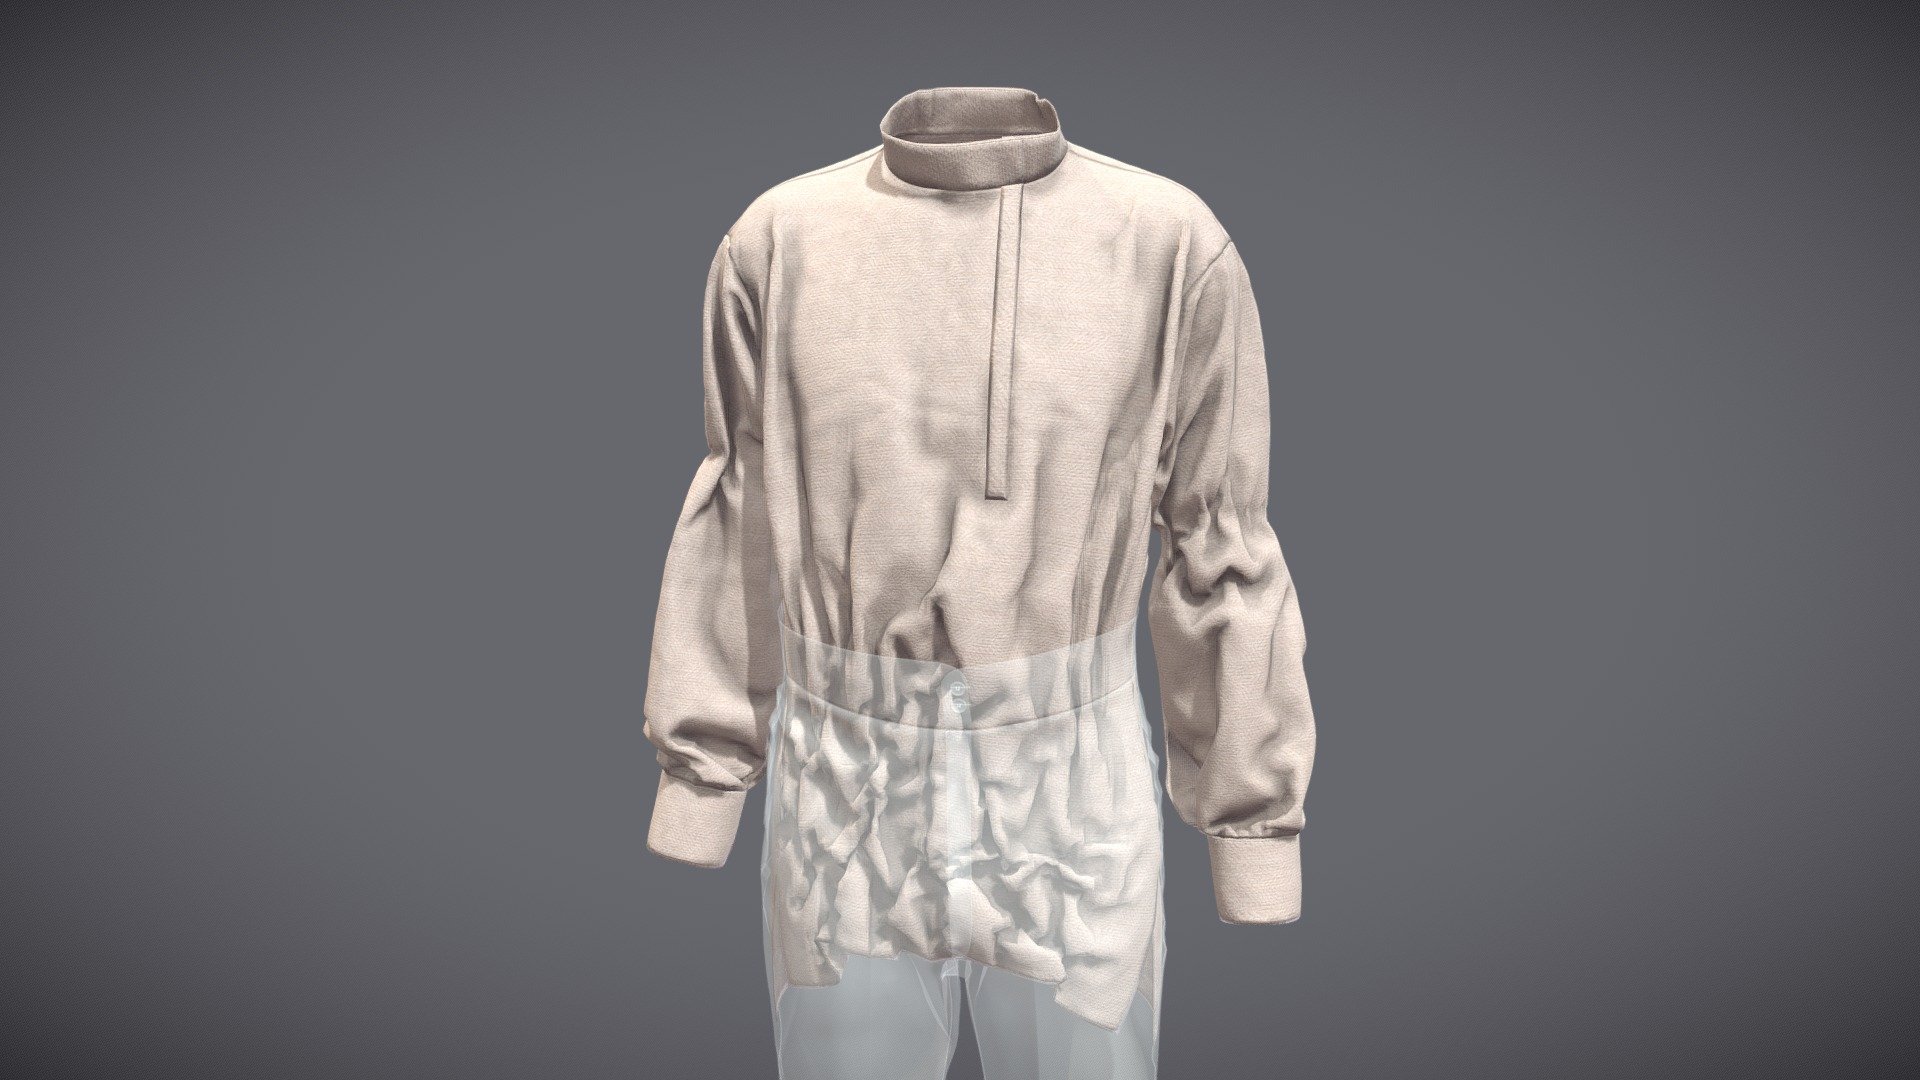 The 3D model presents a digital twin of a theatrical costume for a play by A.N. Ostrovsky. The garment was modelled by using historical block patterns, 2D scans of textile materials and 3d scans of contemporary actors. Anthroscan, Clo3D, 3dsMax, PixPaint and SubstancePainter software programs were applied.

The authors of the 3D model are Aleksei Moskvin  and Mariia Moskvina  (Saint Petersburg State University of Industrial Technologies and Design).

The authors thank prof. Victor Kuzmichev (Ivanovo State Polytechnic University), faculty members and students of Ivanovo State Polytechnic University and their colleagues from Ivanovo State Museum of Local History named after D.G. Burylin for providing data required for 3D modelling.

Find more historical costumes at
https://sketchfab.com/alekseimoskvin1
https://sketchfab.com/mariia89
https://sketchfab.com/K_SH_I_IVGPU
https://independent.academia.edu/AlekseiMoskvin
https://www.researchgate.net/profile/Aleksei-Moskvin - 1861 Shirt - Download Free 3D model by Aleksei Moskvin (@alekseimoskvin1) 3d model